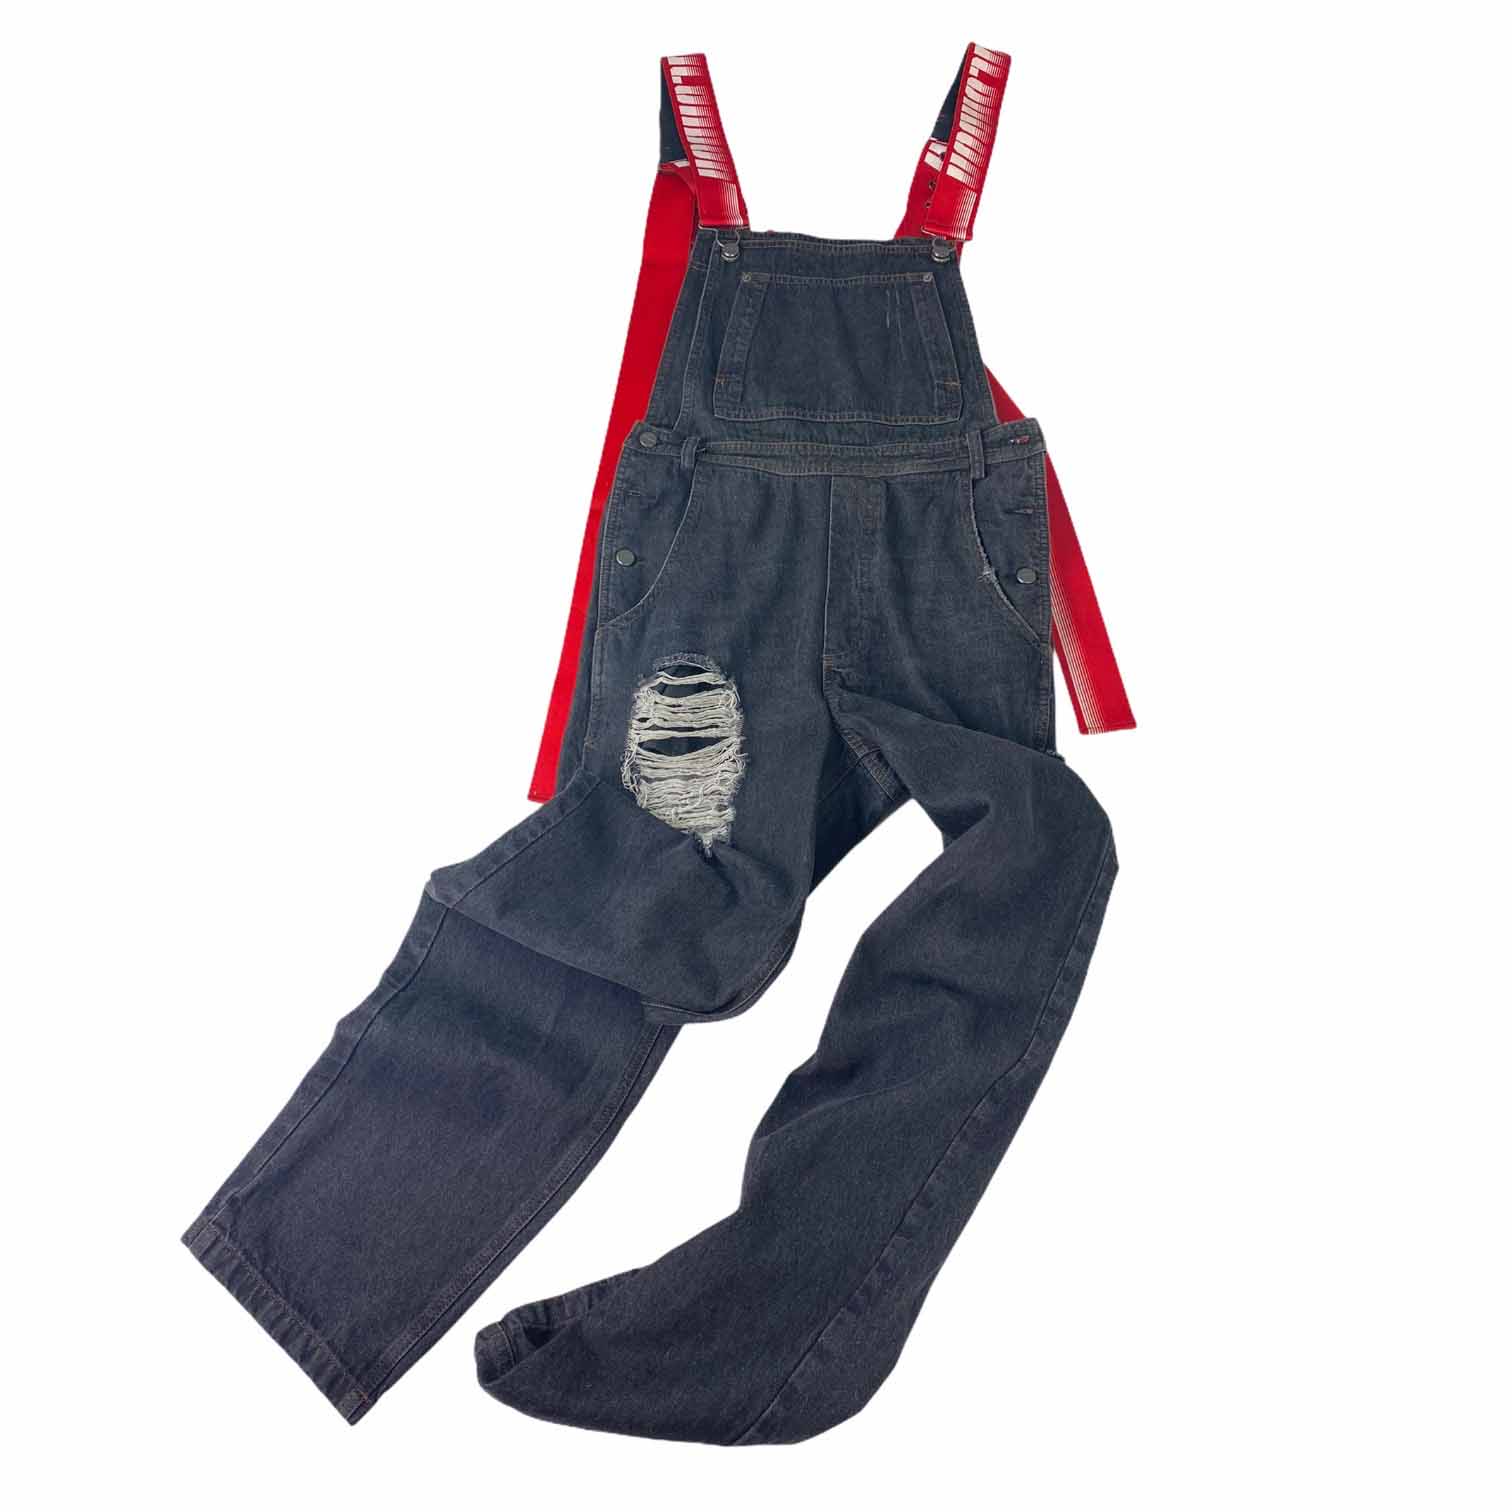 [D-Antidote] Hanging Tap Overall Pants - Size S